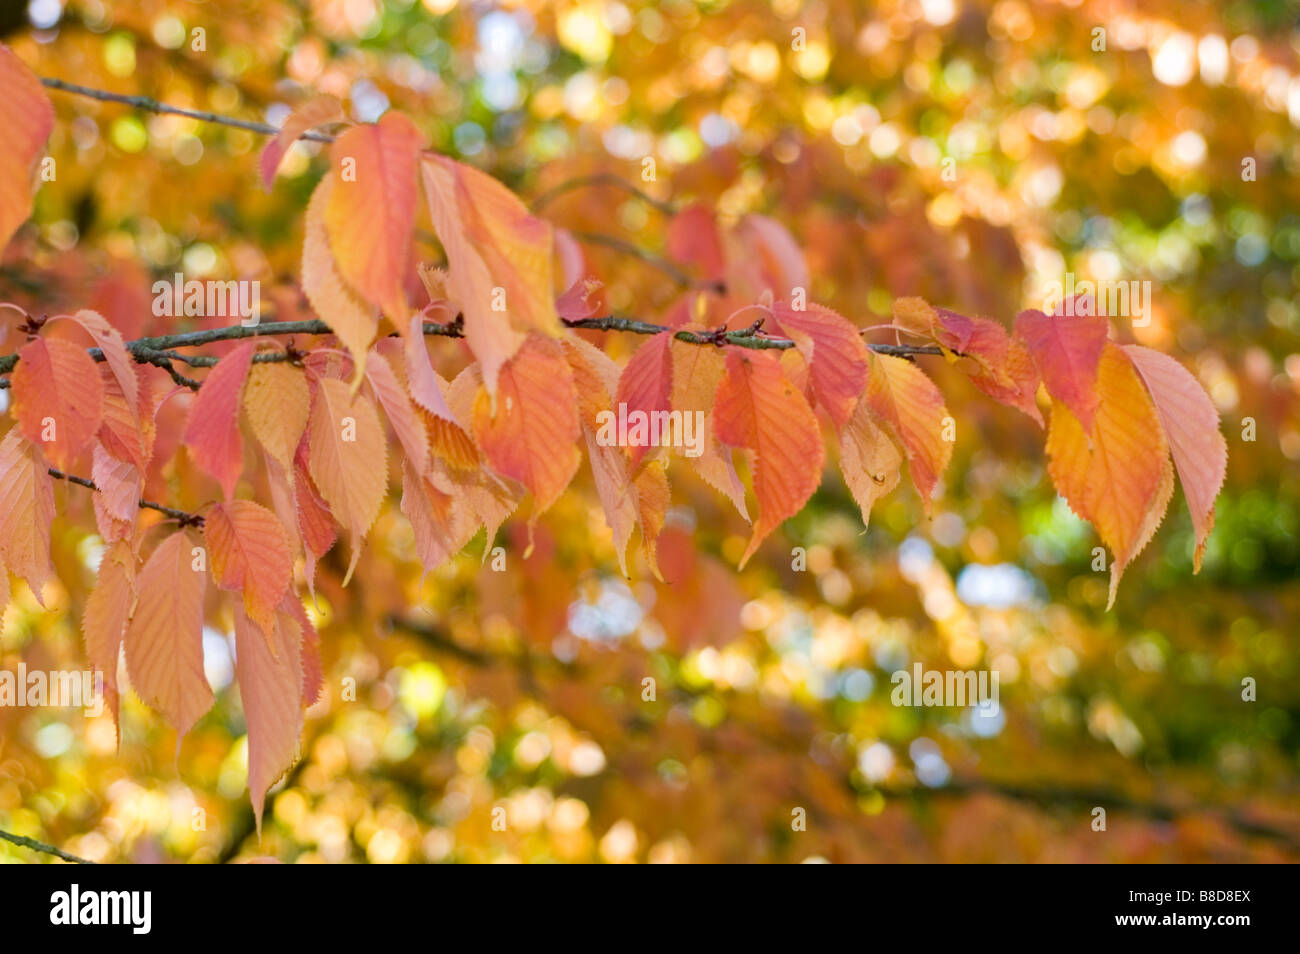 Red yellow autumn leaves of cherry tree, prunus x hillieri Kornicensis, Rosaceae family Stock Photo